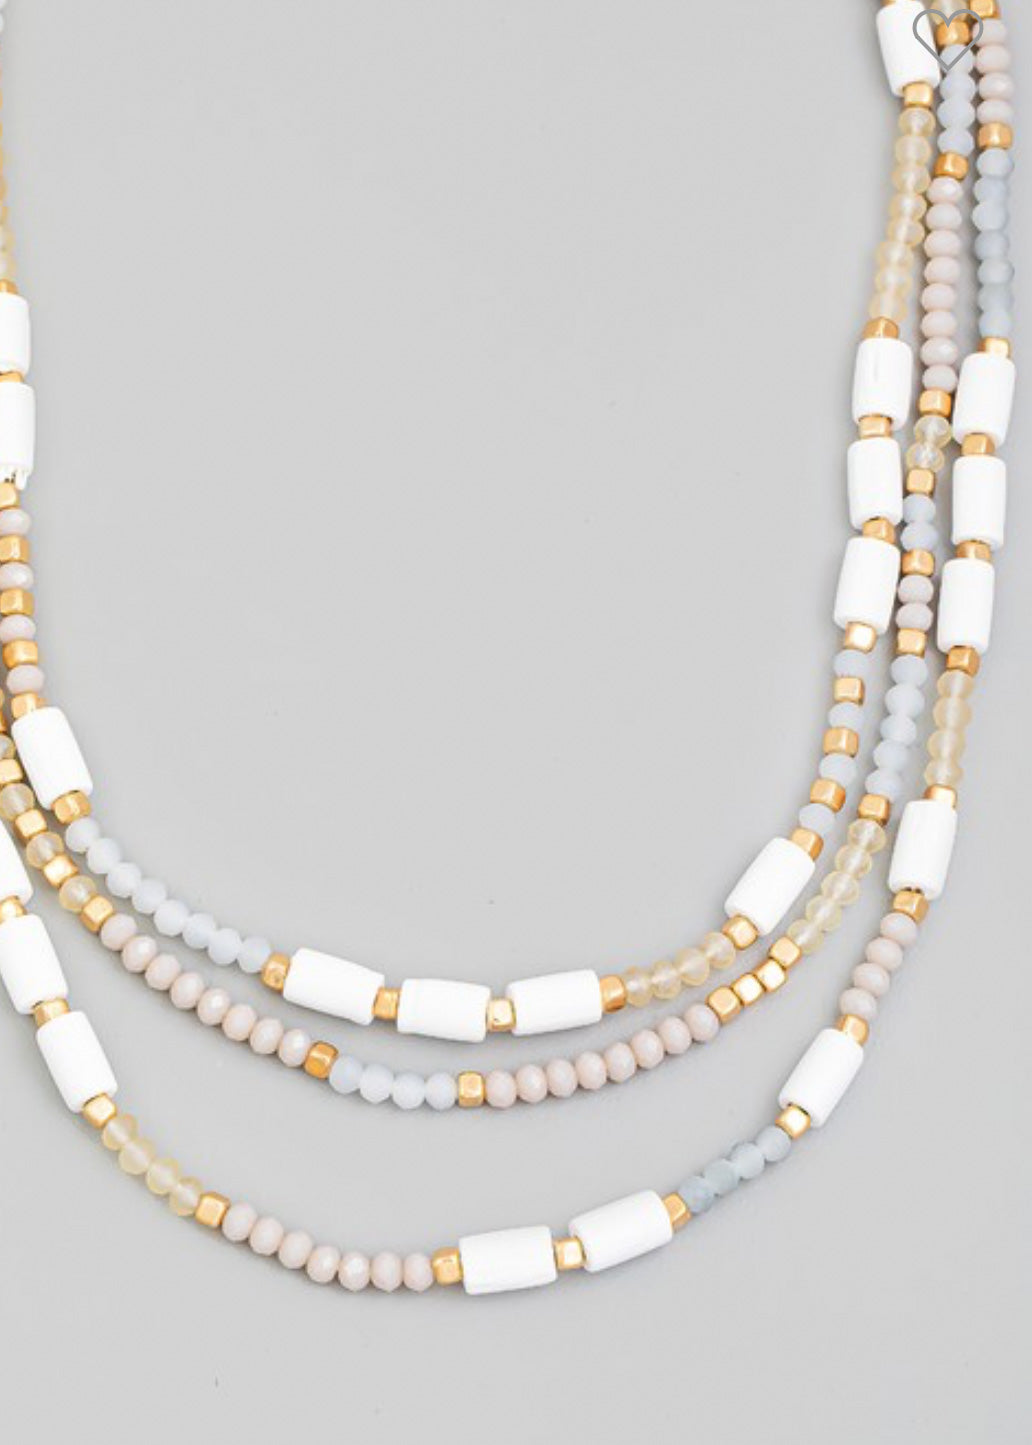 Beaded necklace with multi beads in small rounded frost and gold beads with larger white beads sporadically throughout 